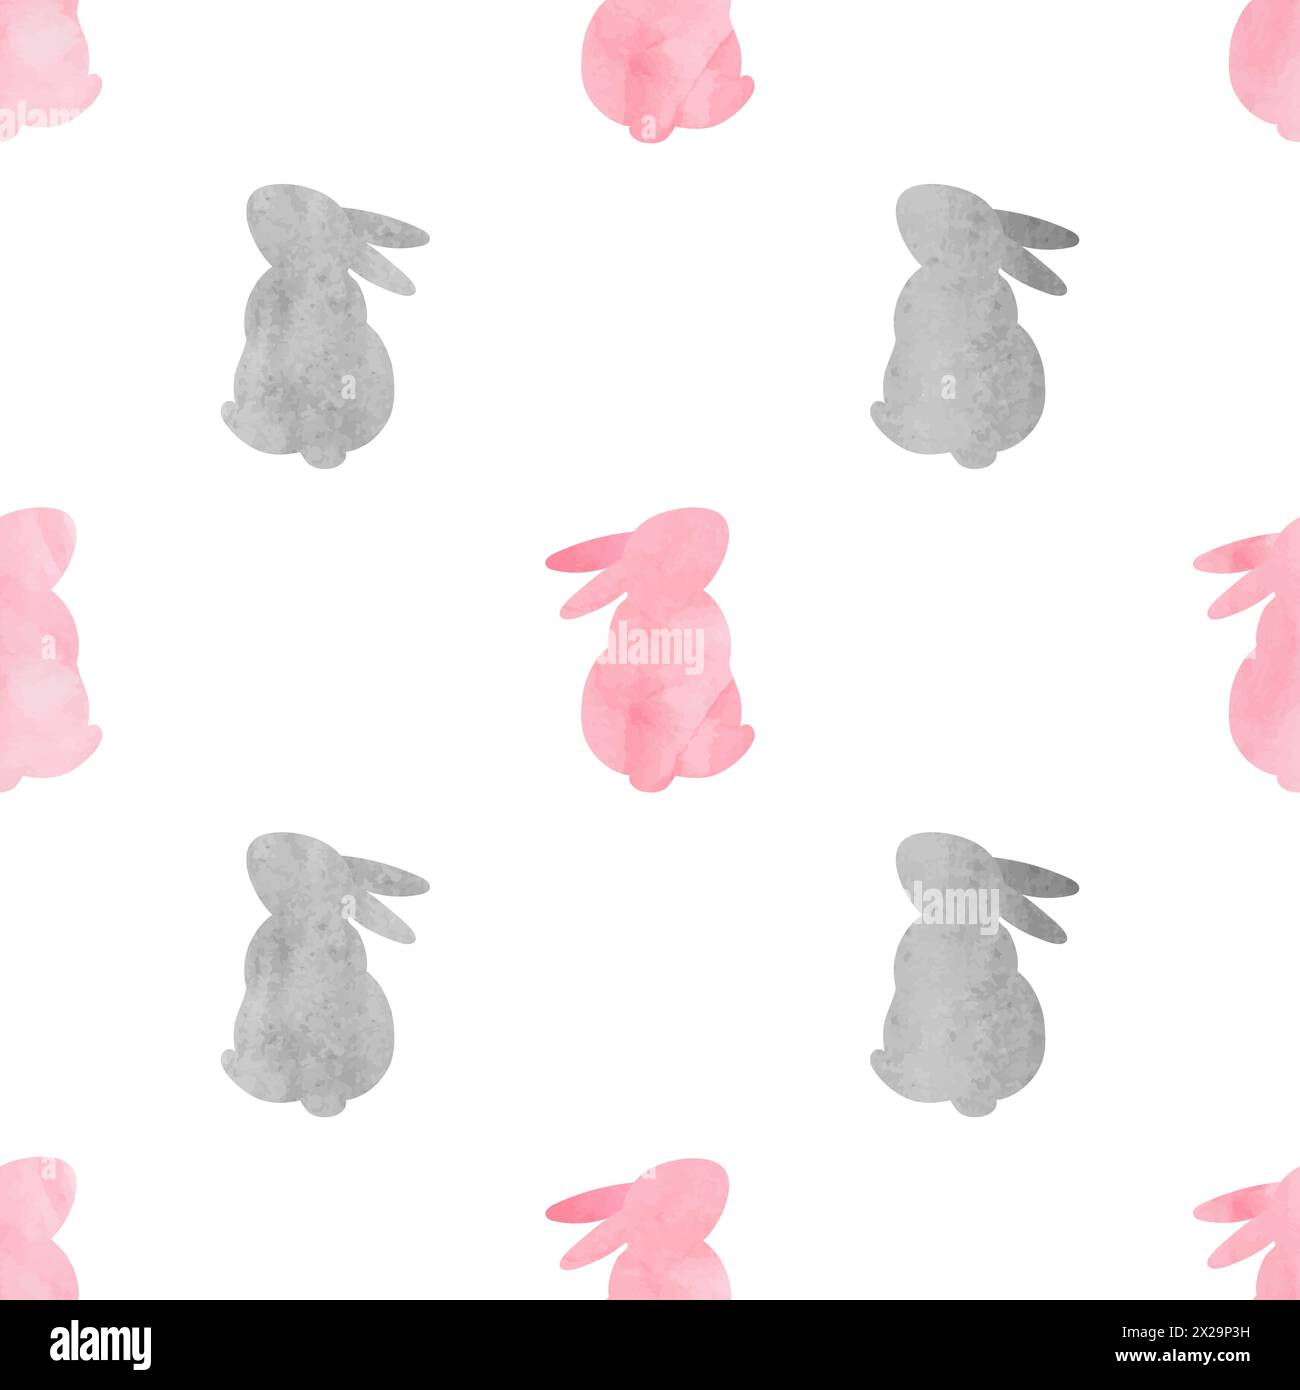 Cute watercolor bunny pattern. Seamless vector background with rabbits silhouettes Stock Vector